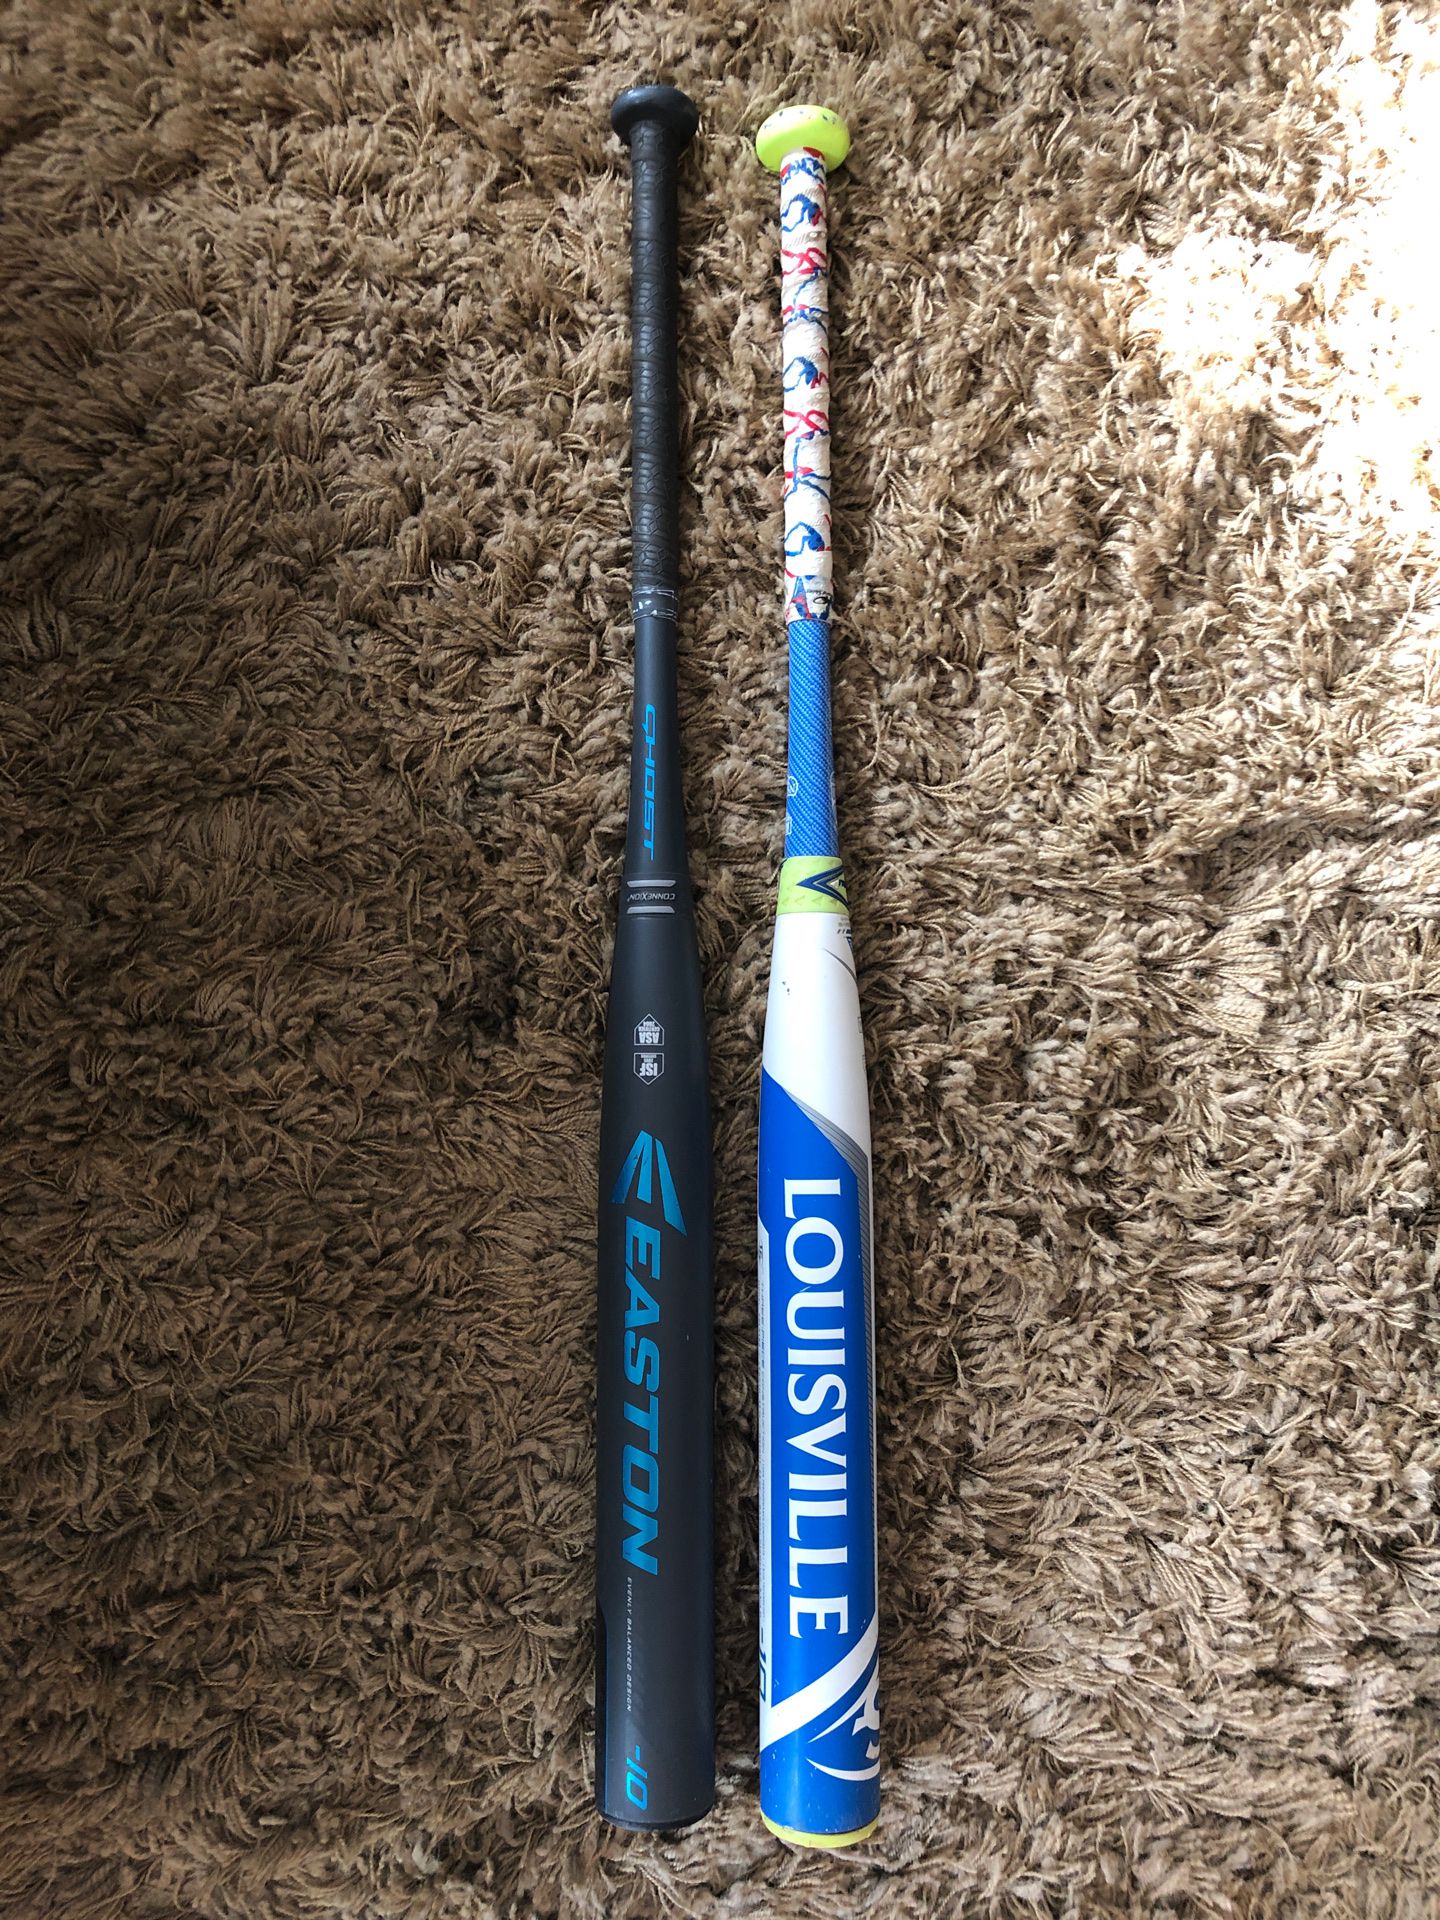 HOT Fastpitch Softball Bats LXT and Ghost